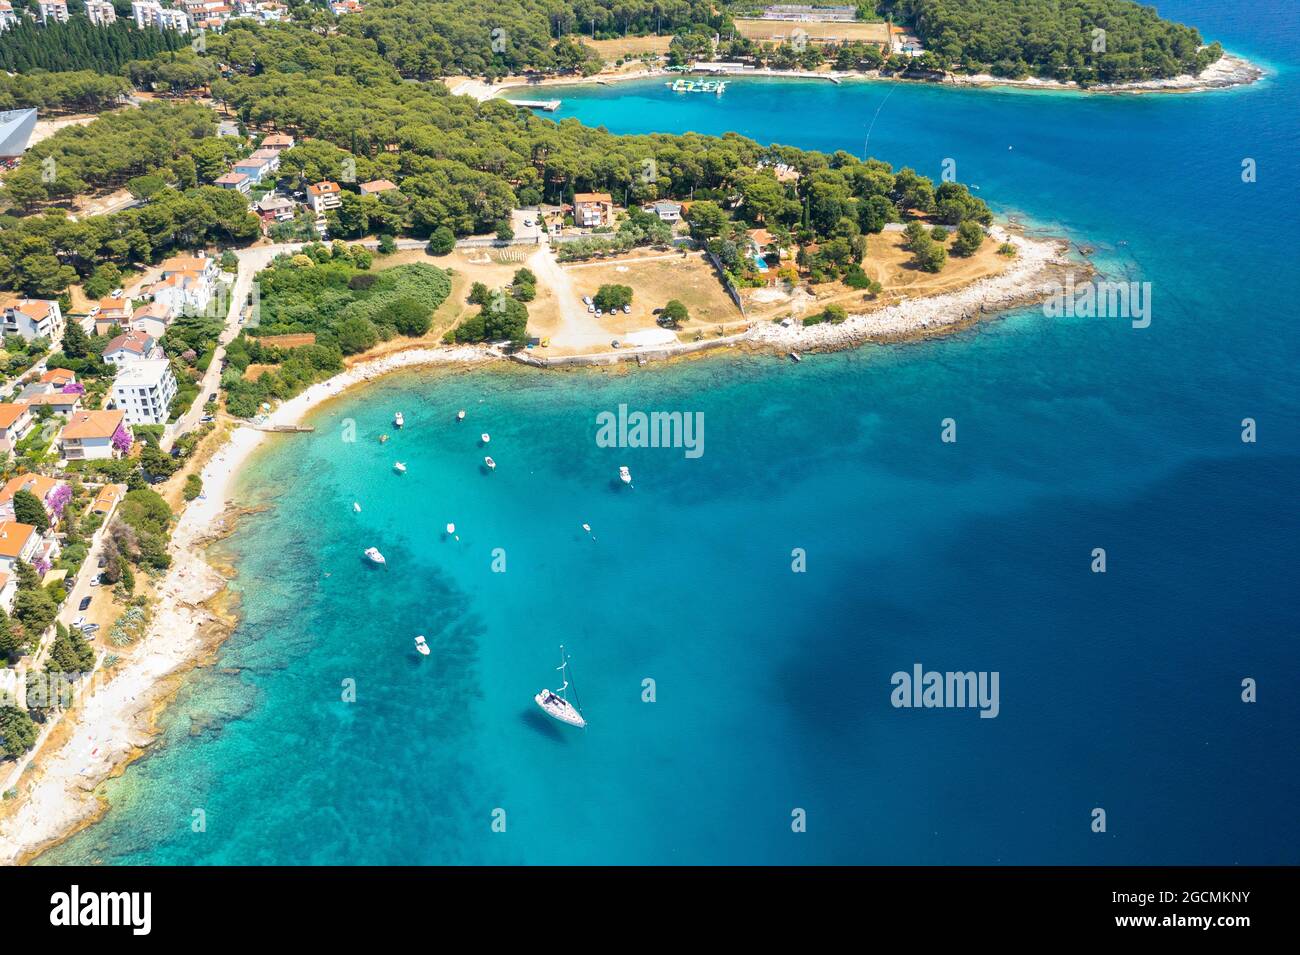 Aerial view of sailboat and small boats or yachts in the turquoise waters of the Adriatic sea close to beach of island. Stock Photo